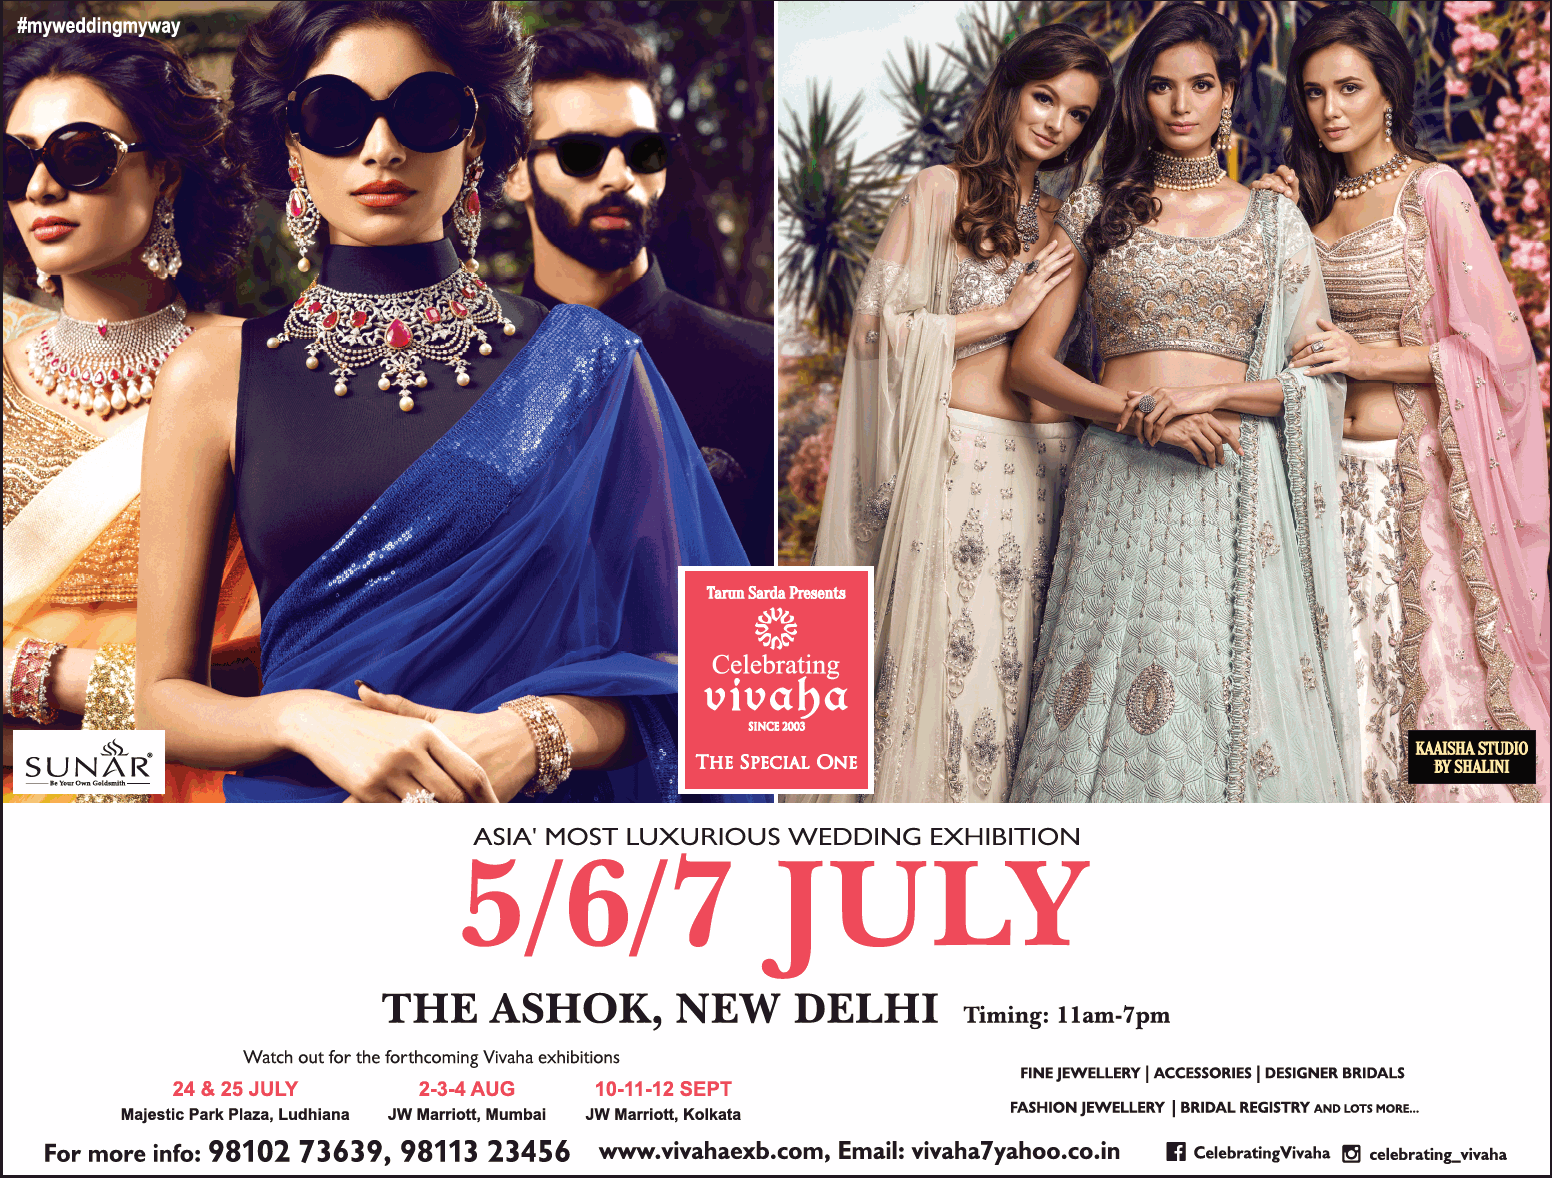 celebrating-vivaha-asias-most-luxurious-wedding-collection-ad-times-of-india-delhi-06-07-2019.png